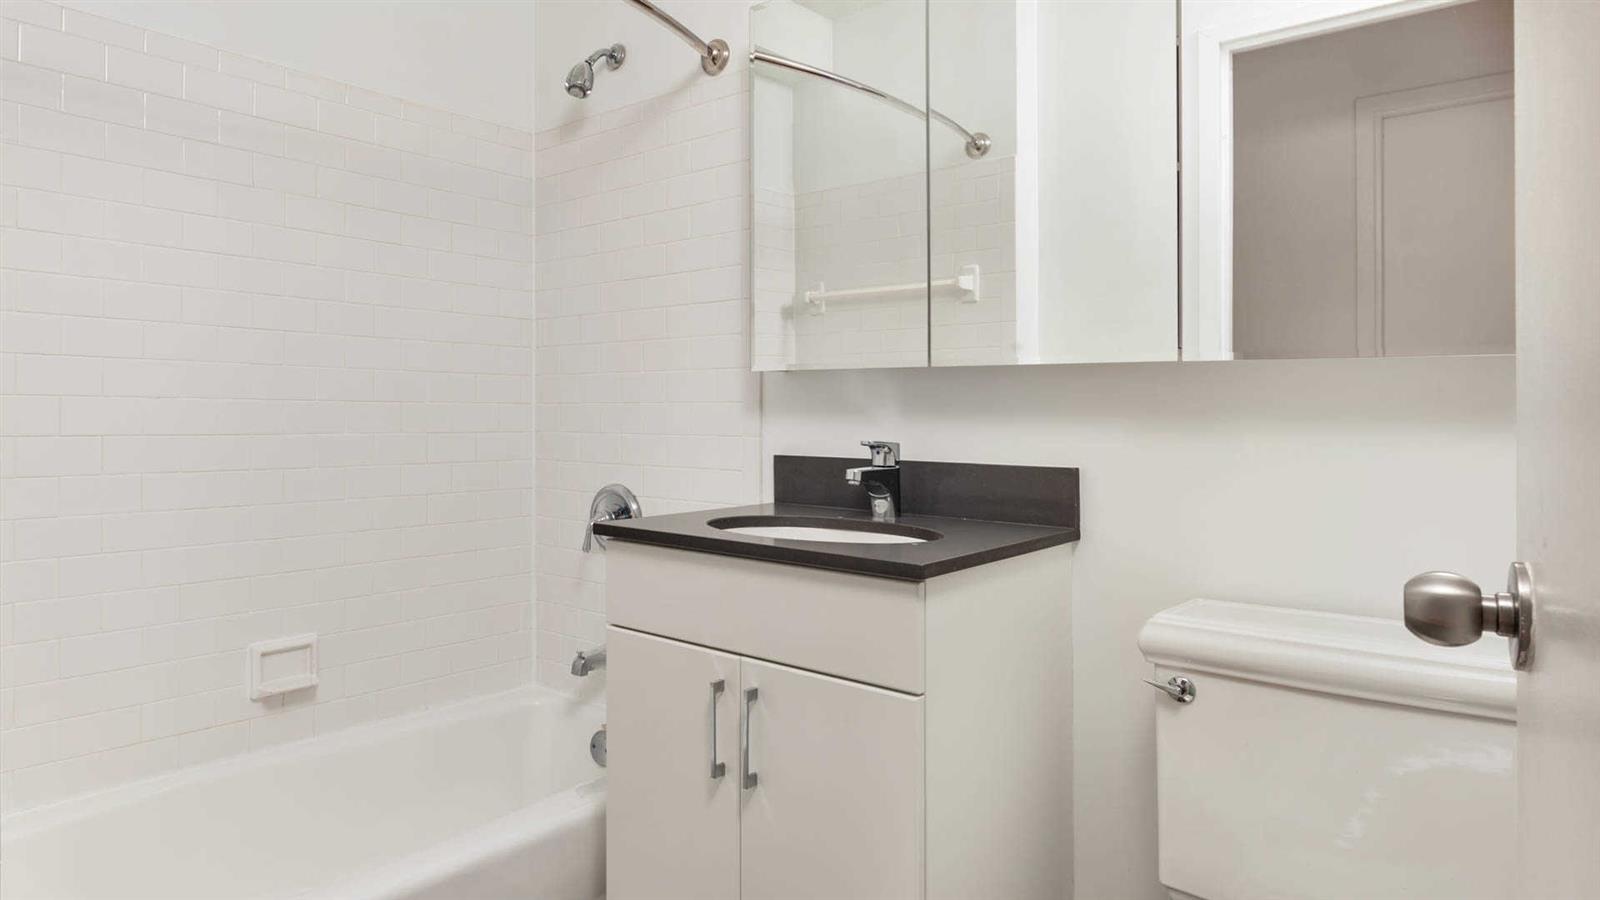 a bathroom with a granite countertop sink a toilet and bathtub